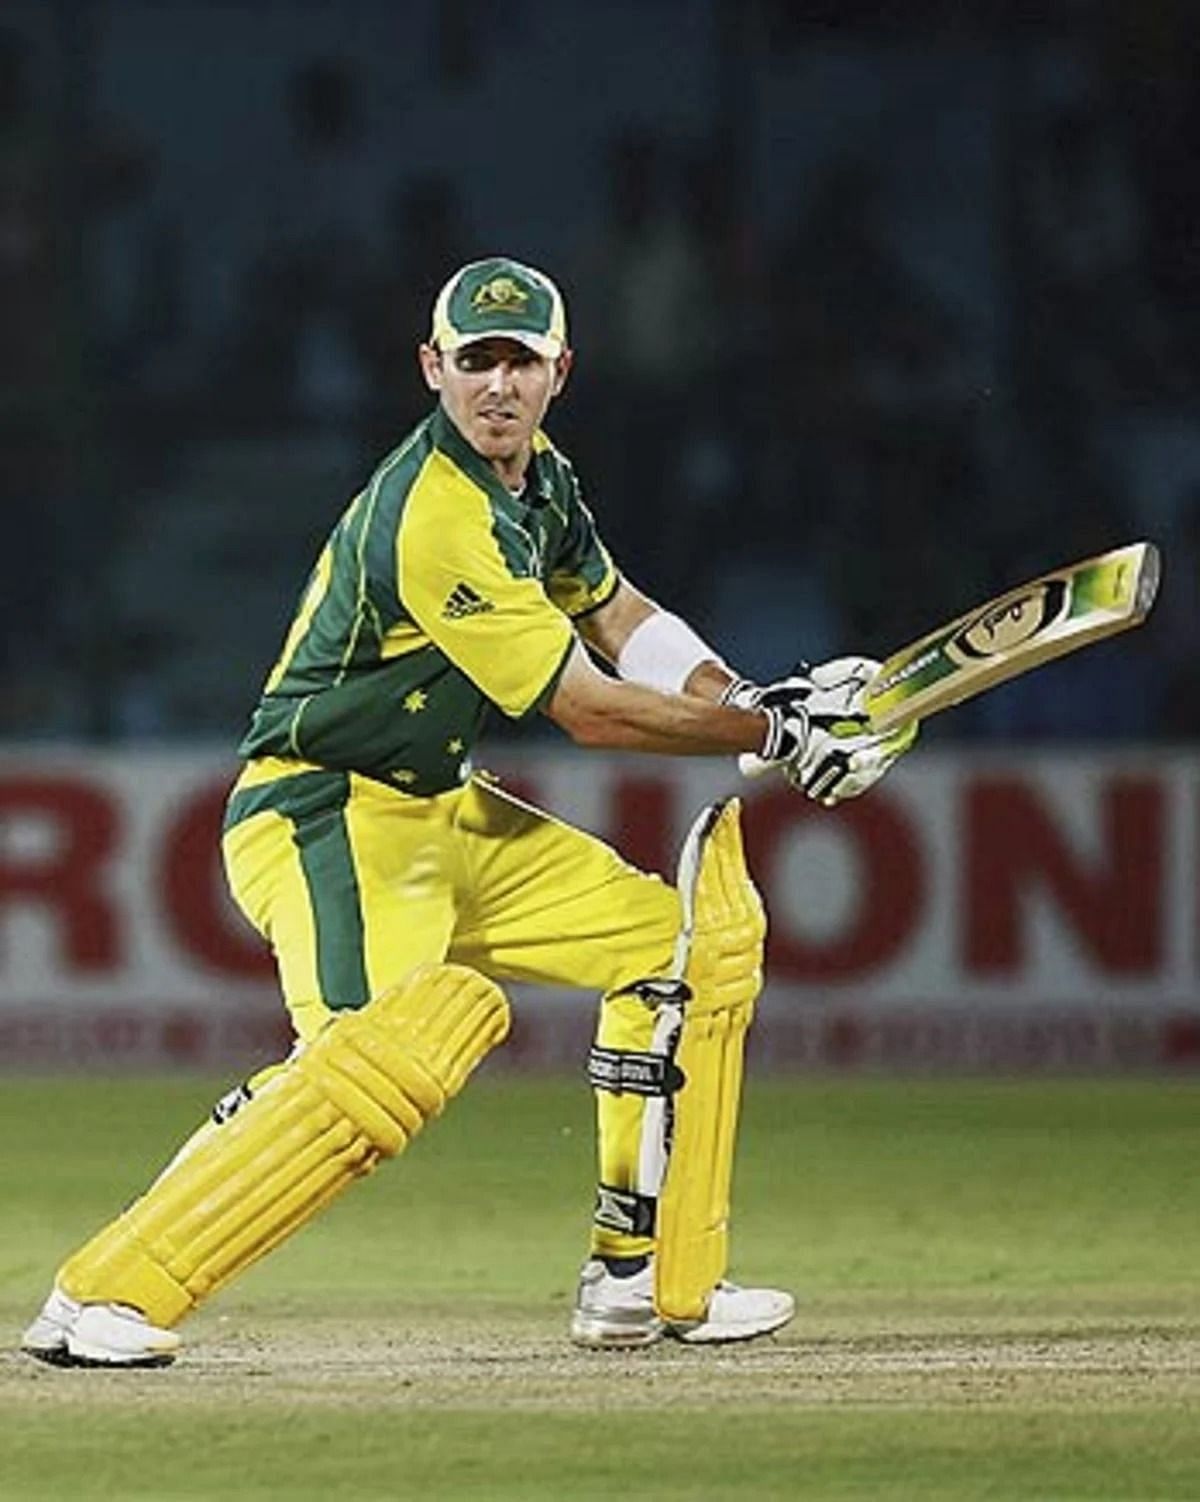 Damien Martyn played a fine hand for the Aussies.